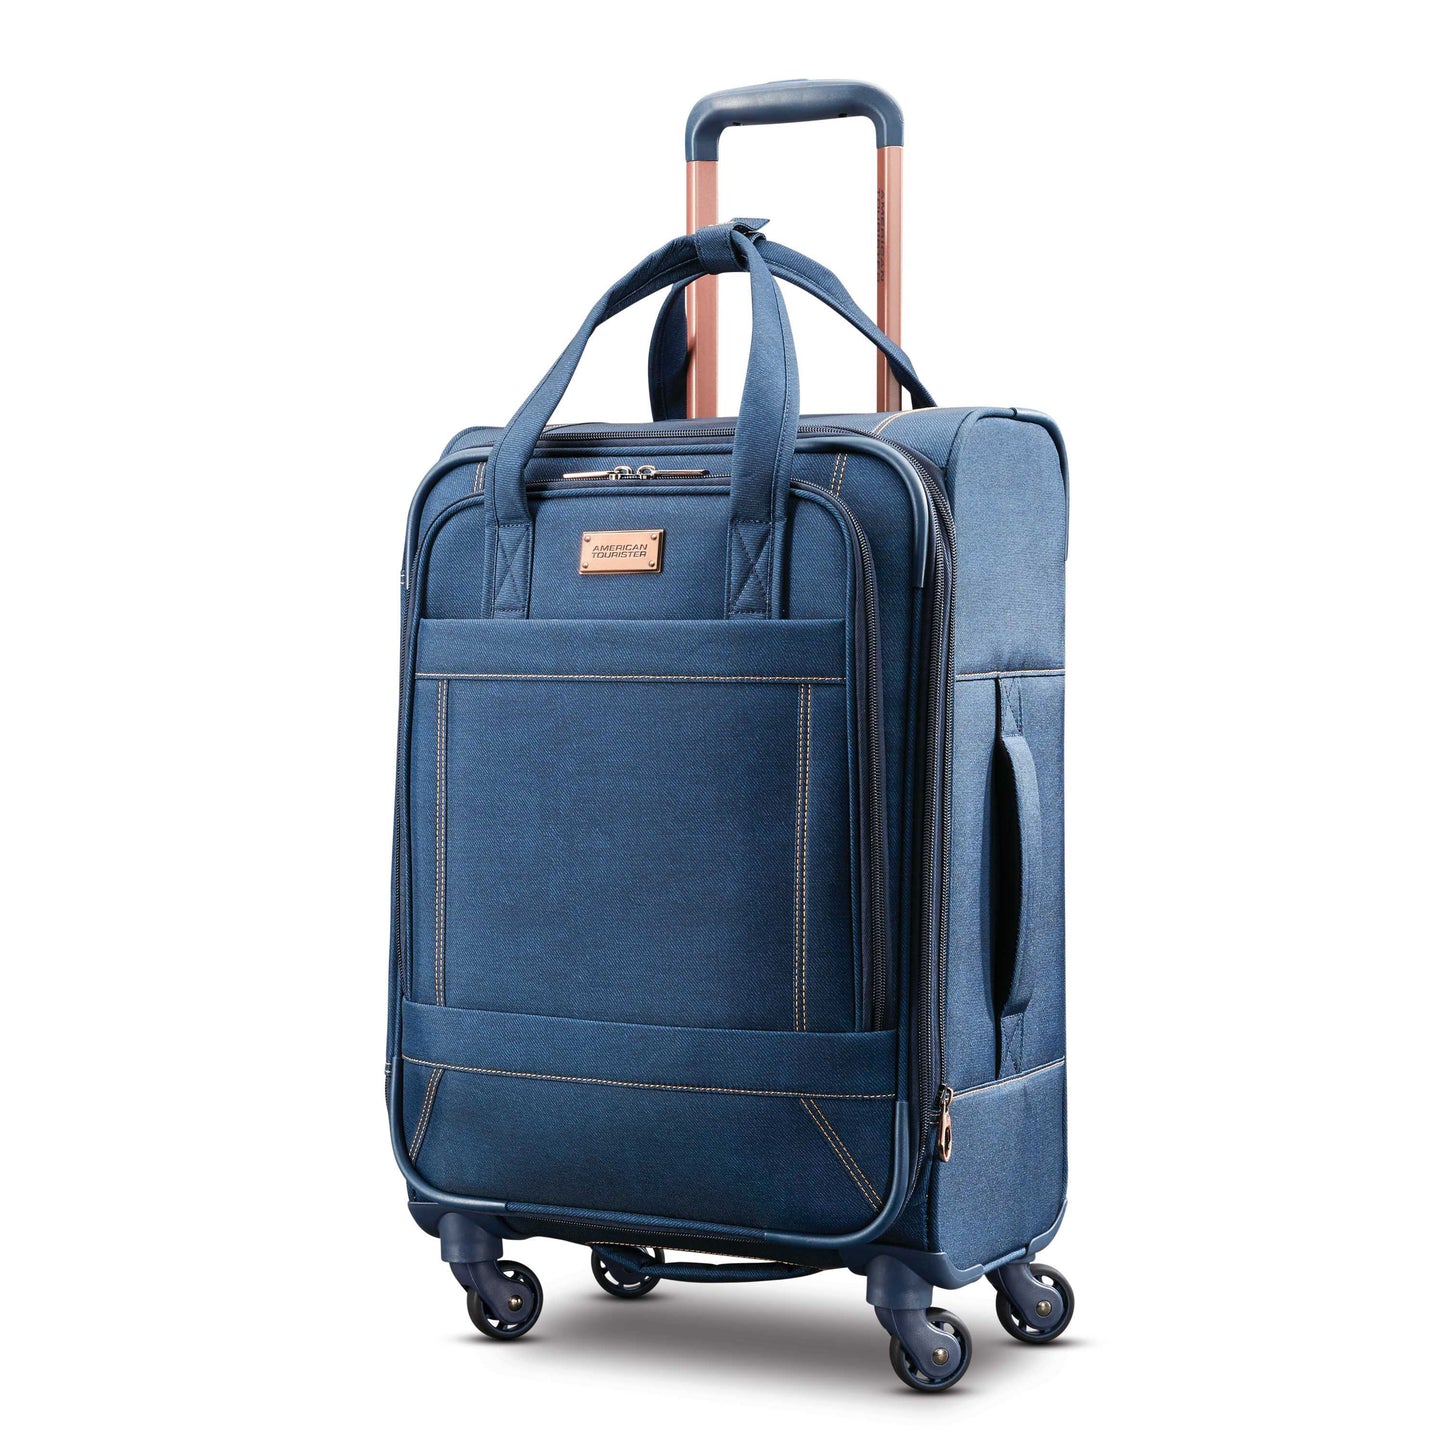 American Tourister Belle Voyage 21" Spinner